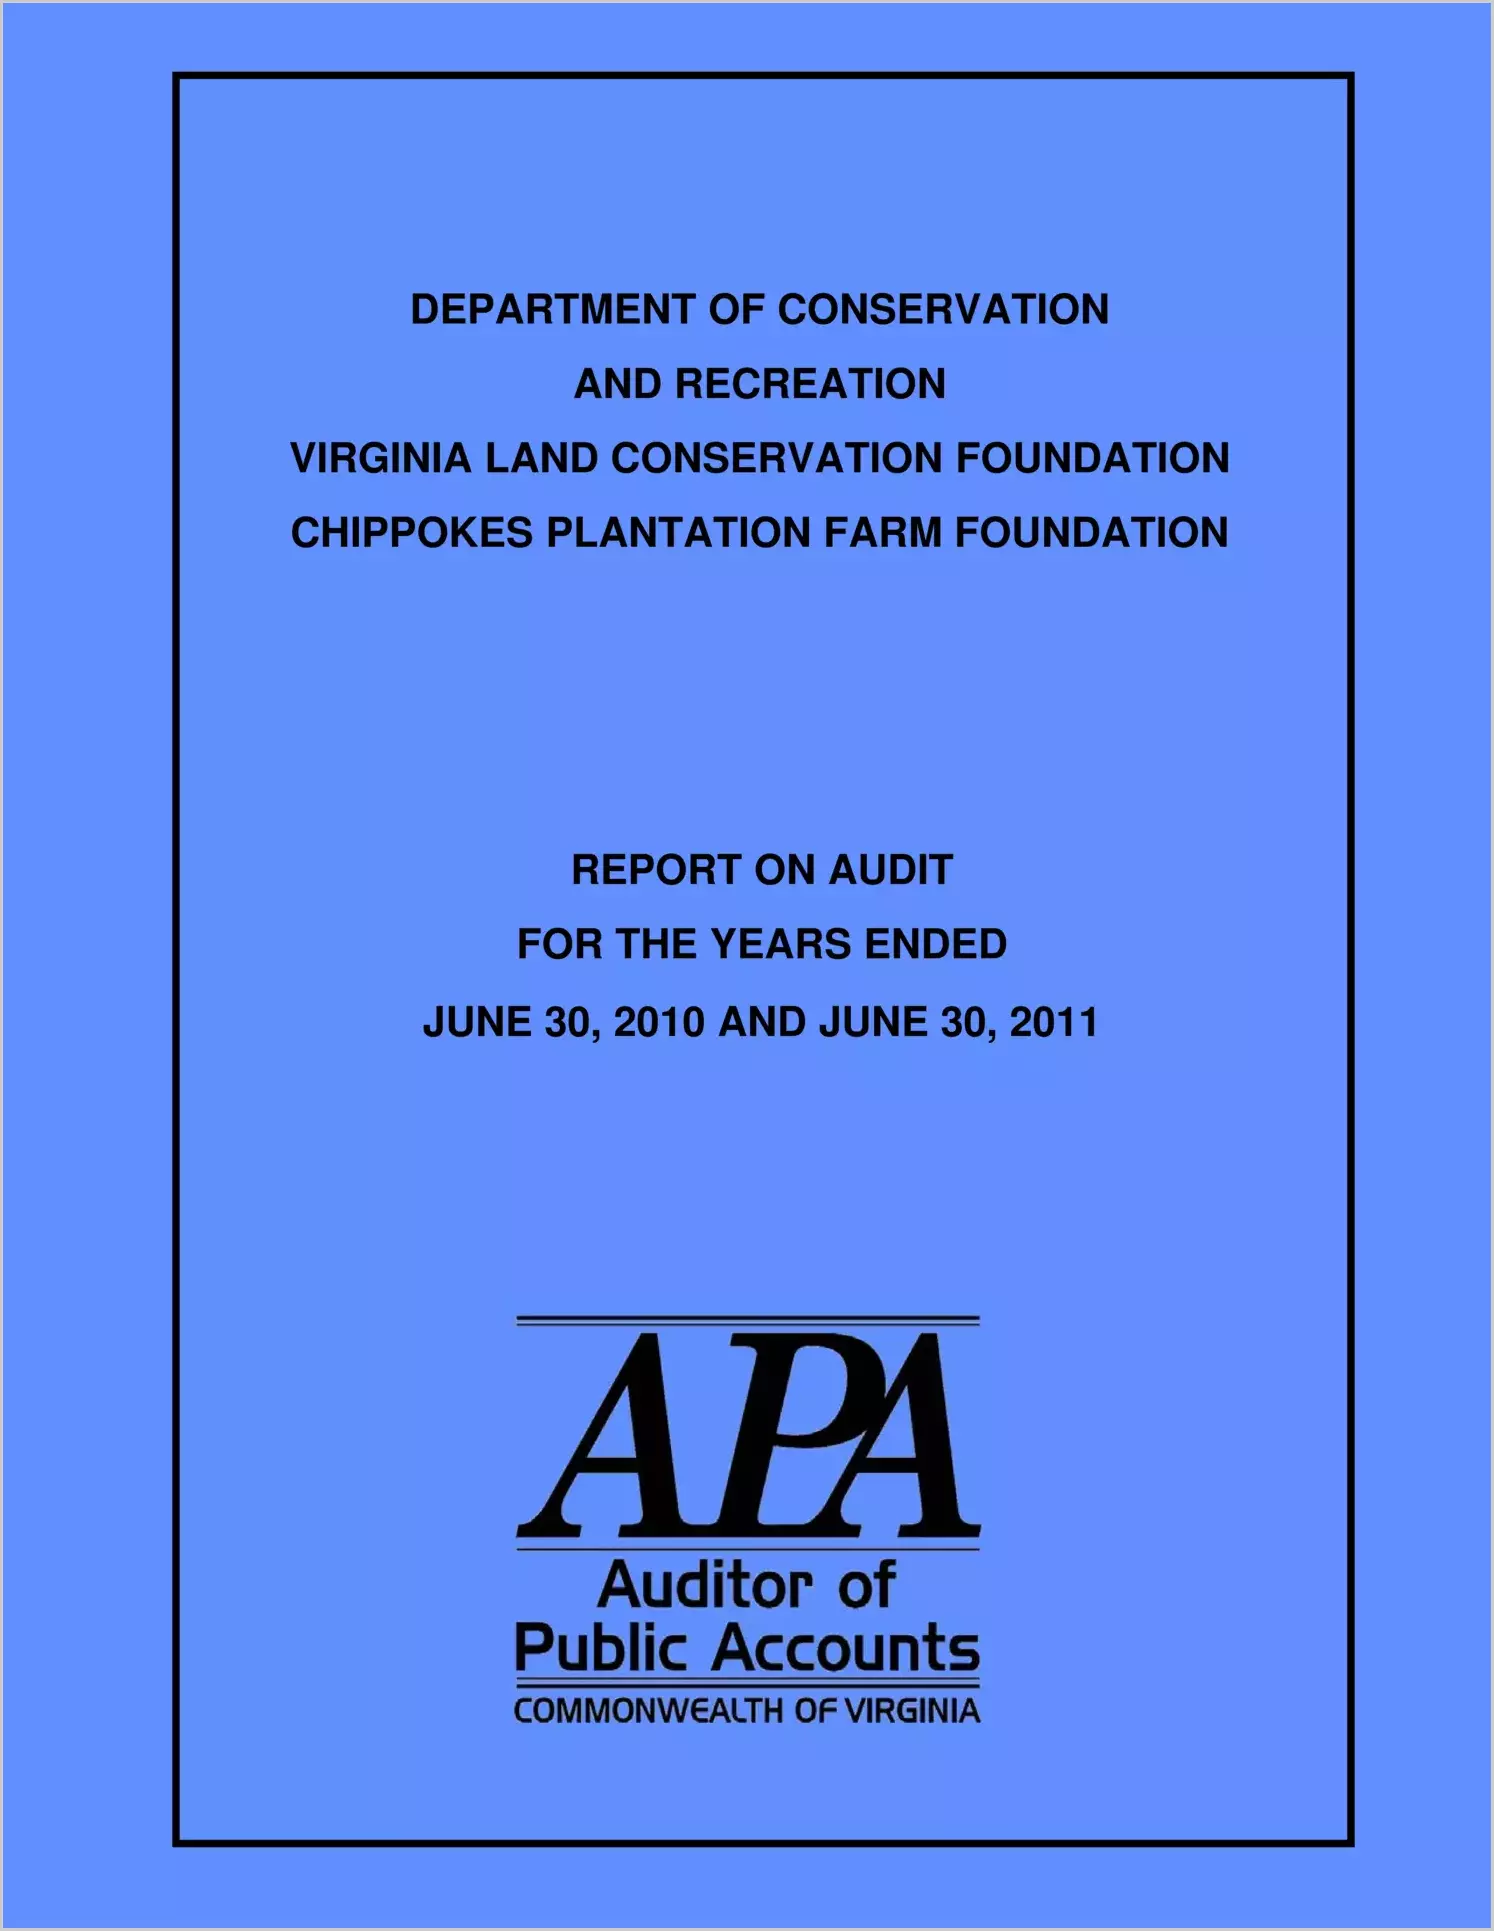 Department of Conservation and Recreation Report on Audit for the Years Ended June 30, 2010 and June 30, 2011